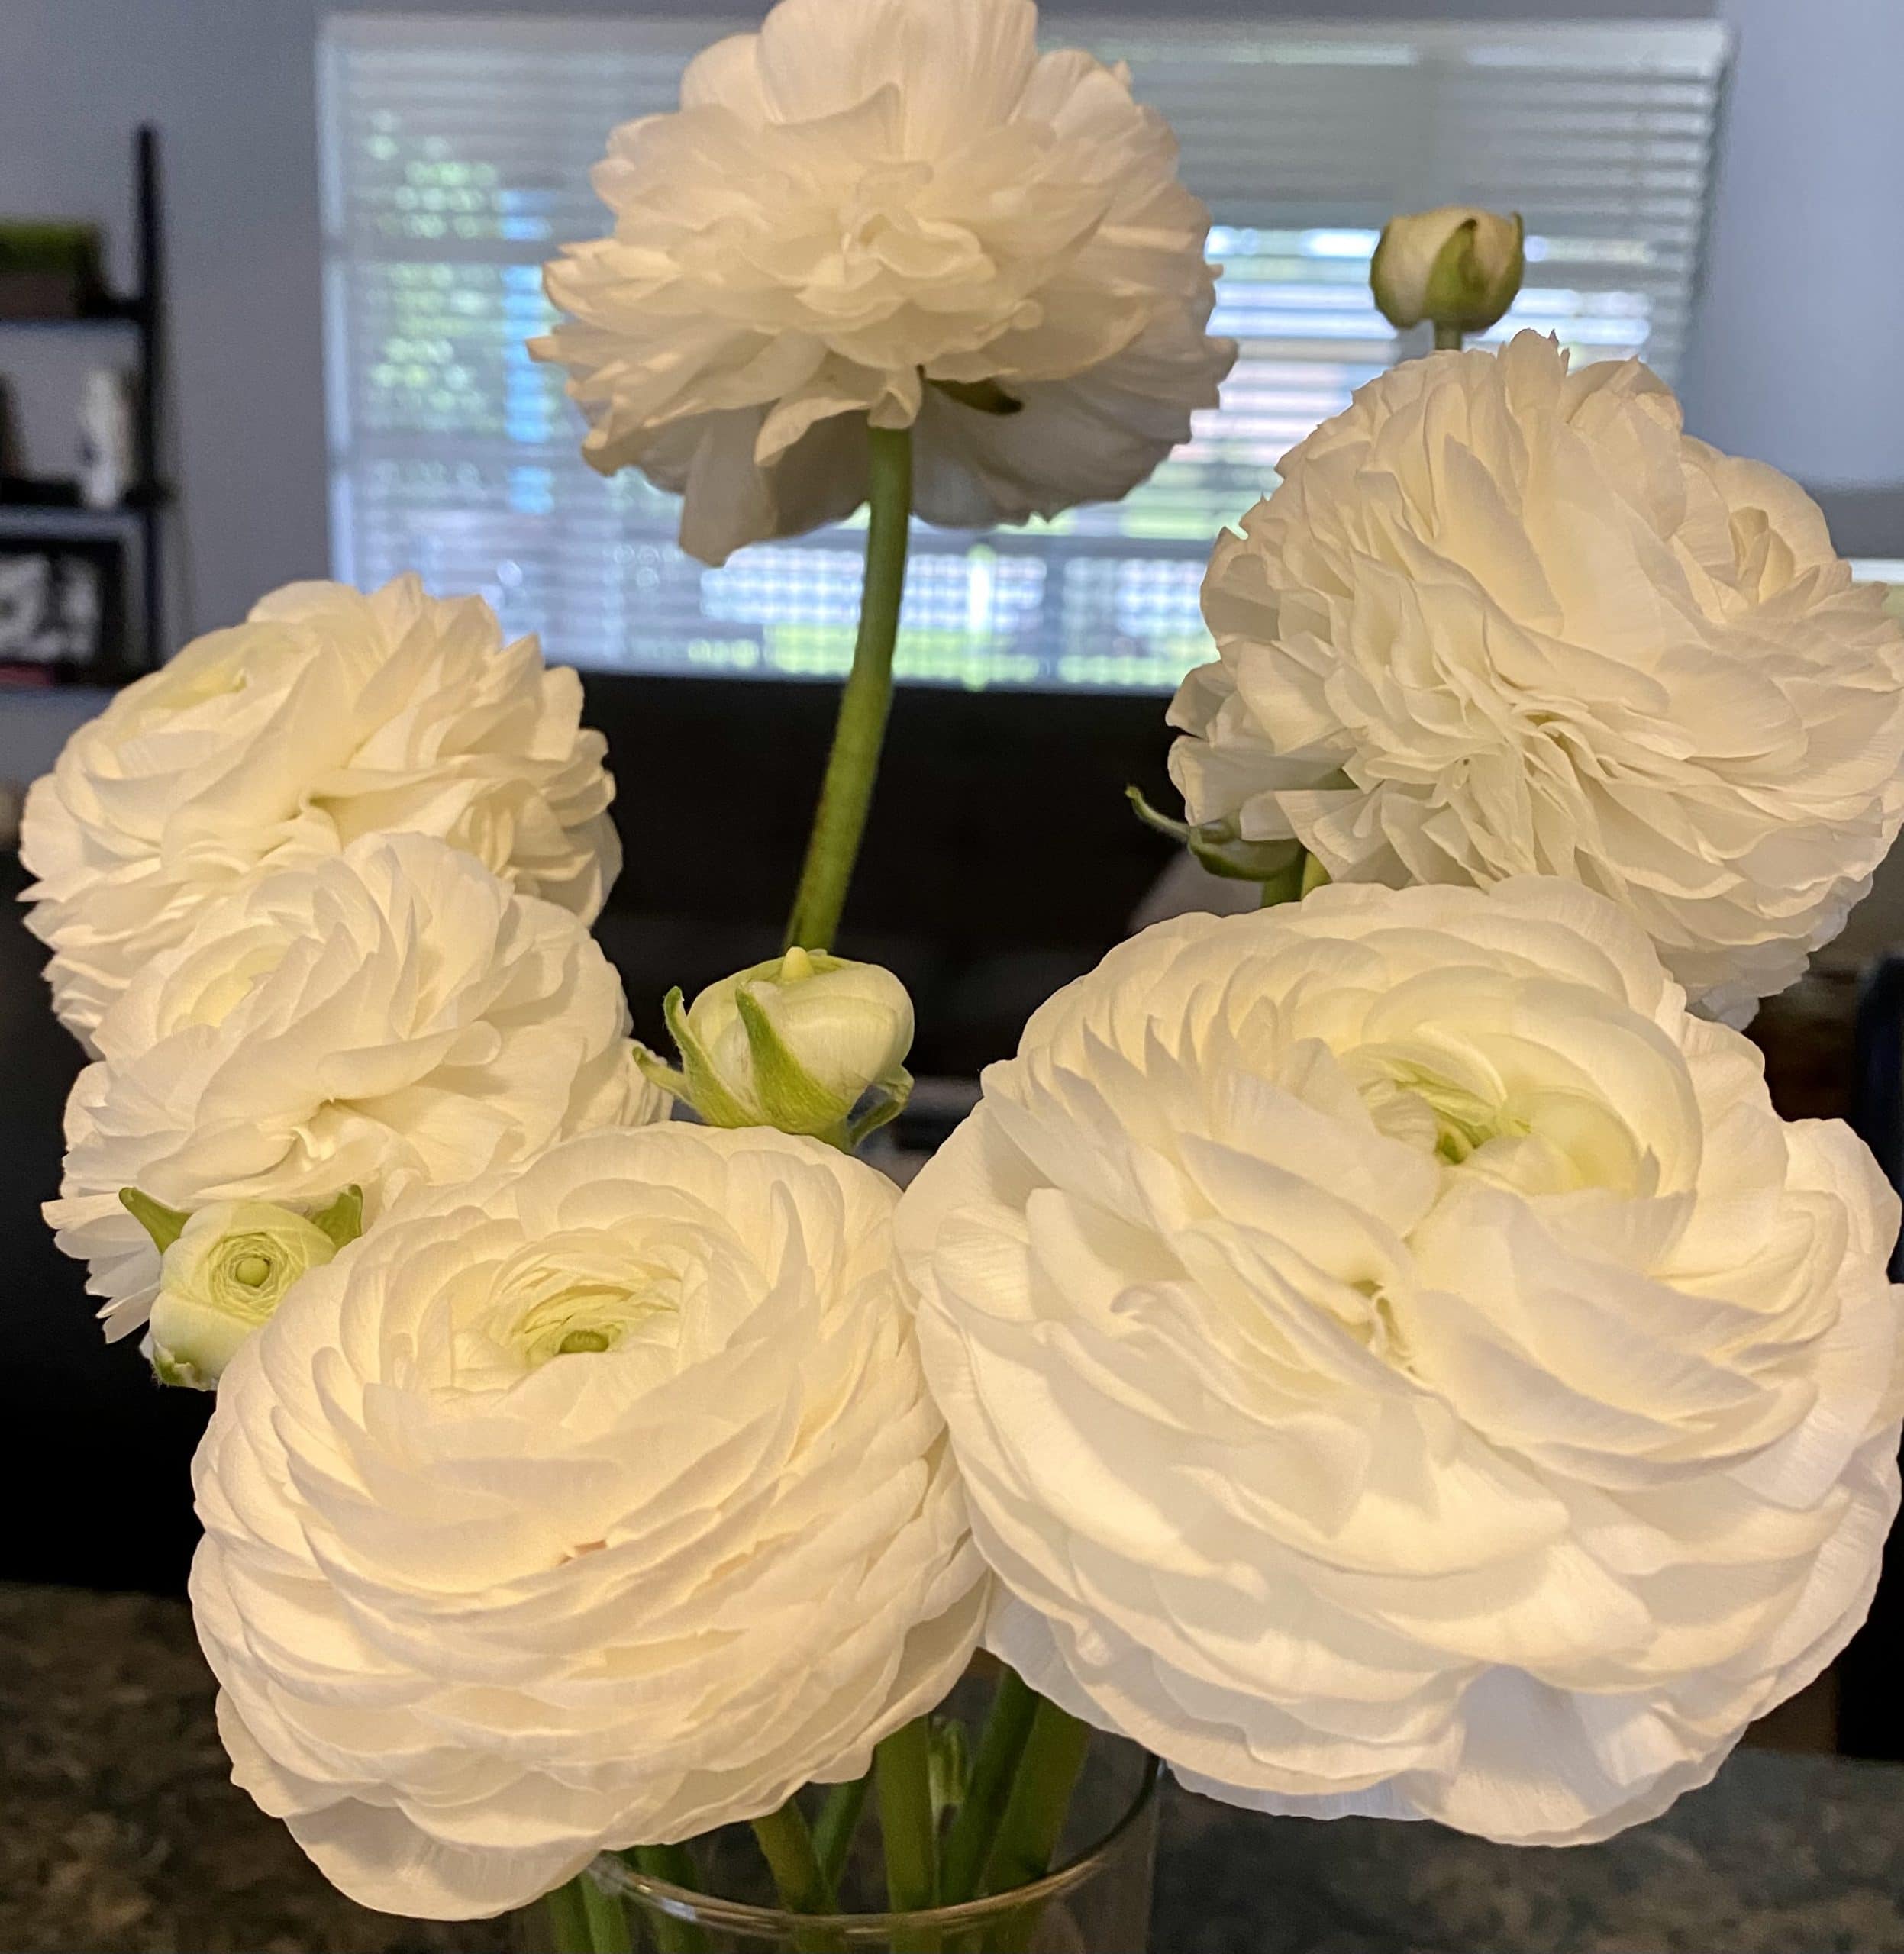 A bunch of fresh gentle peonies in a vase on the table counter